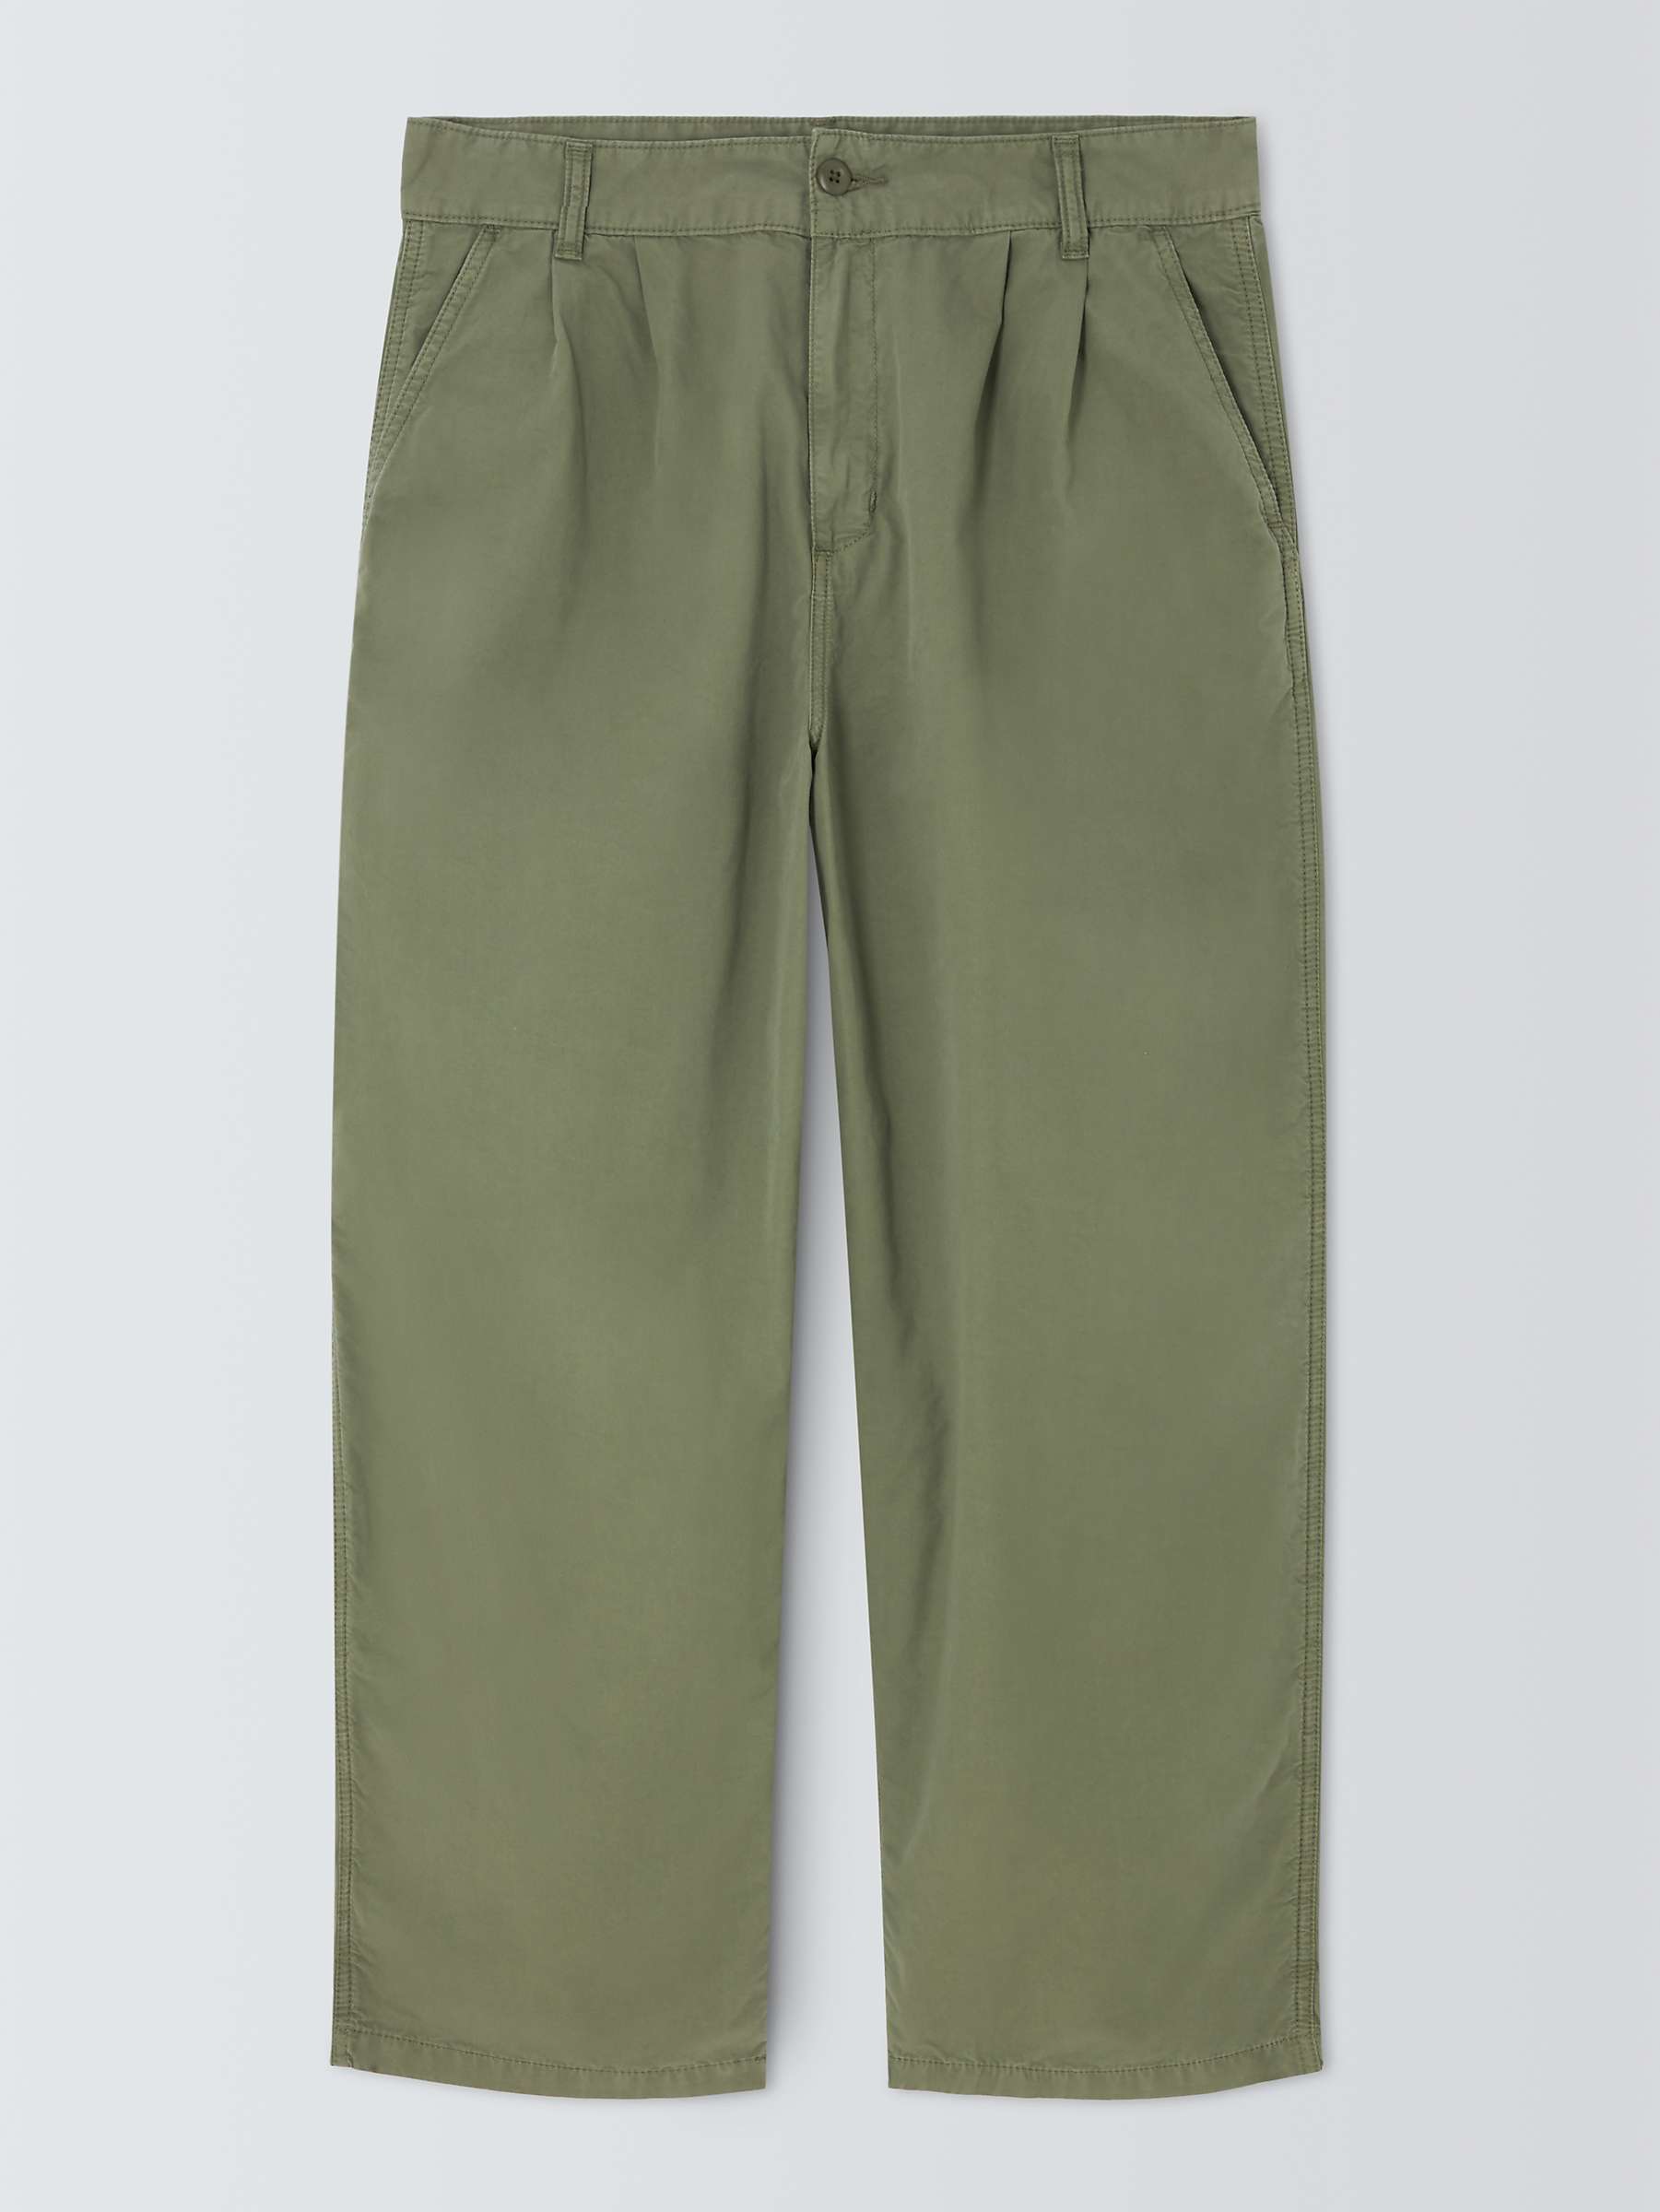 Buy Carhartt WIP Colston Trousers, Green Online at johnlewis.com